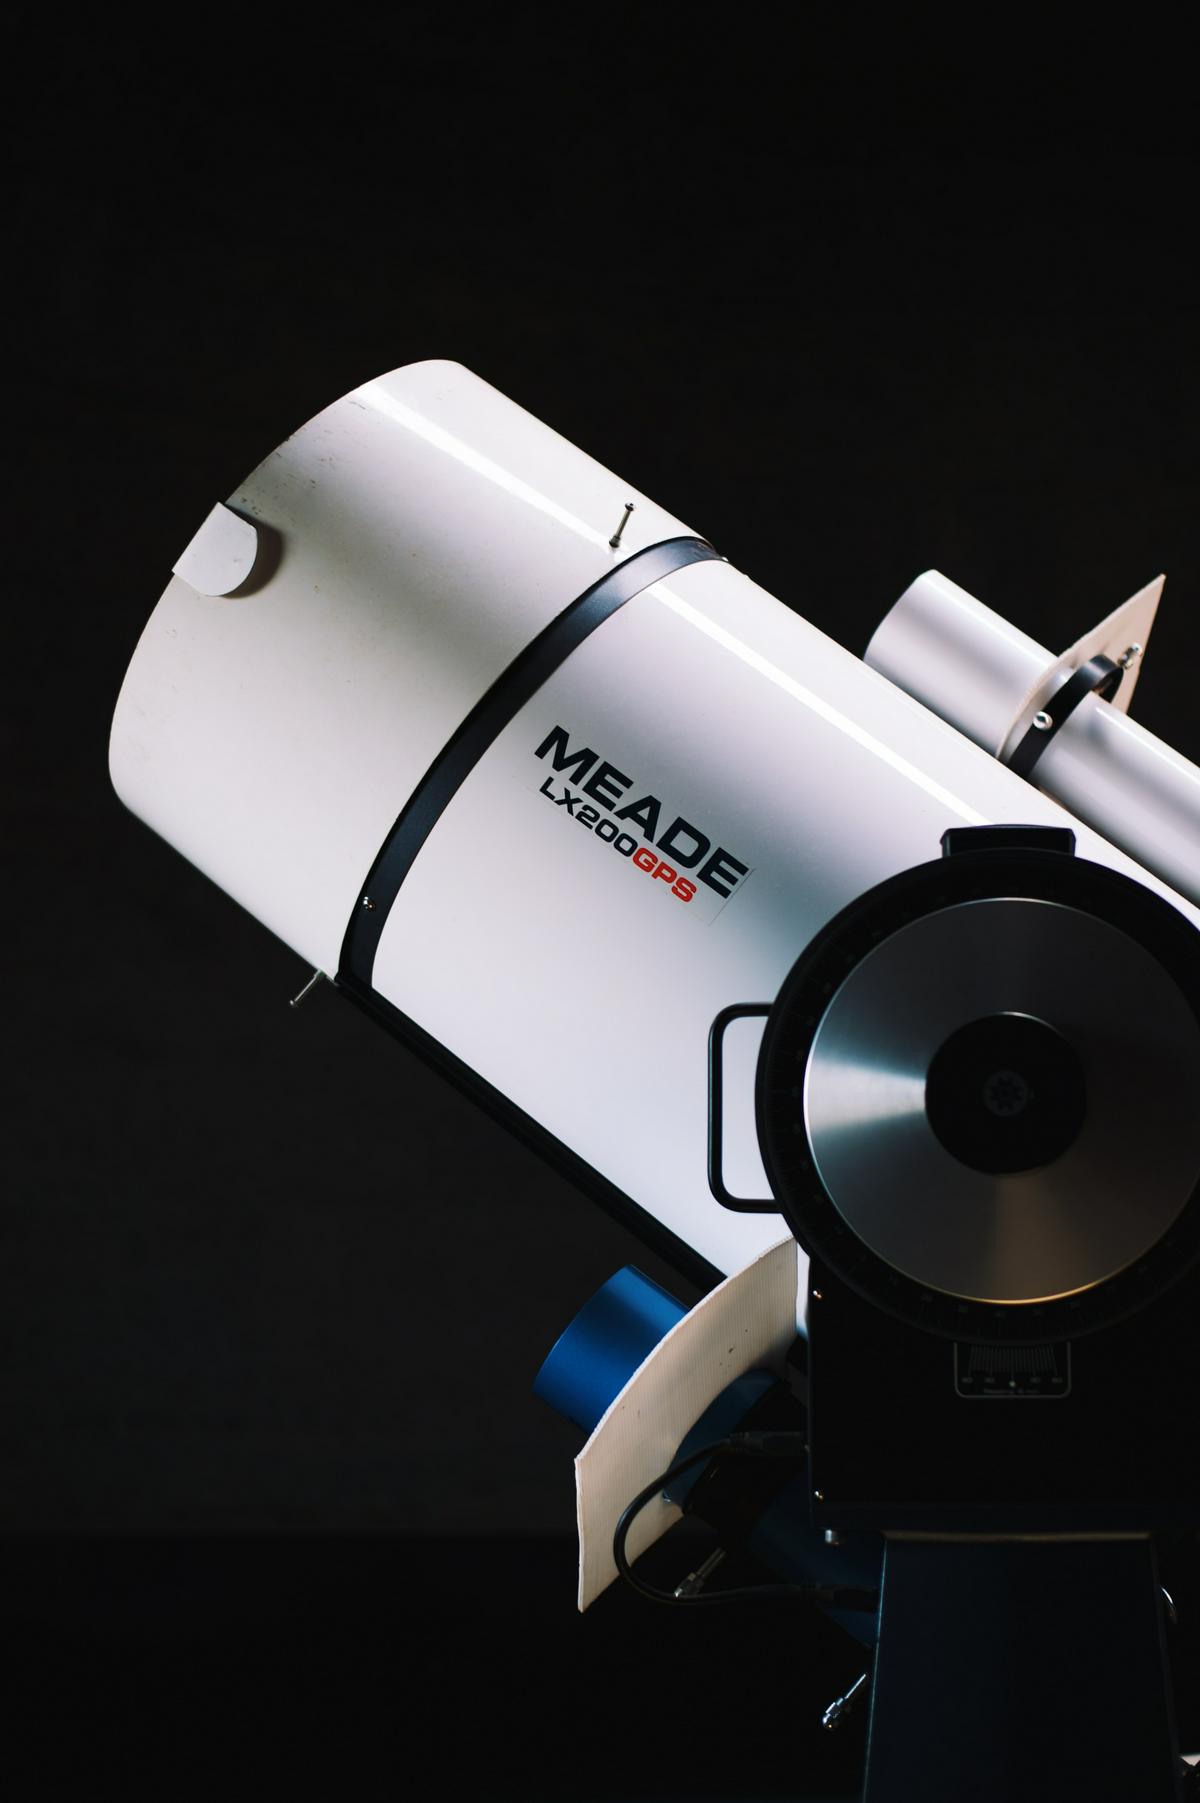 An example image of a telescope with a mount showing the altitude and azimuth directions.